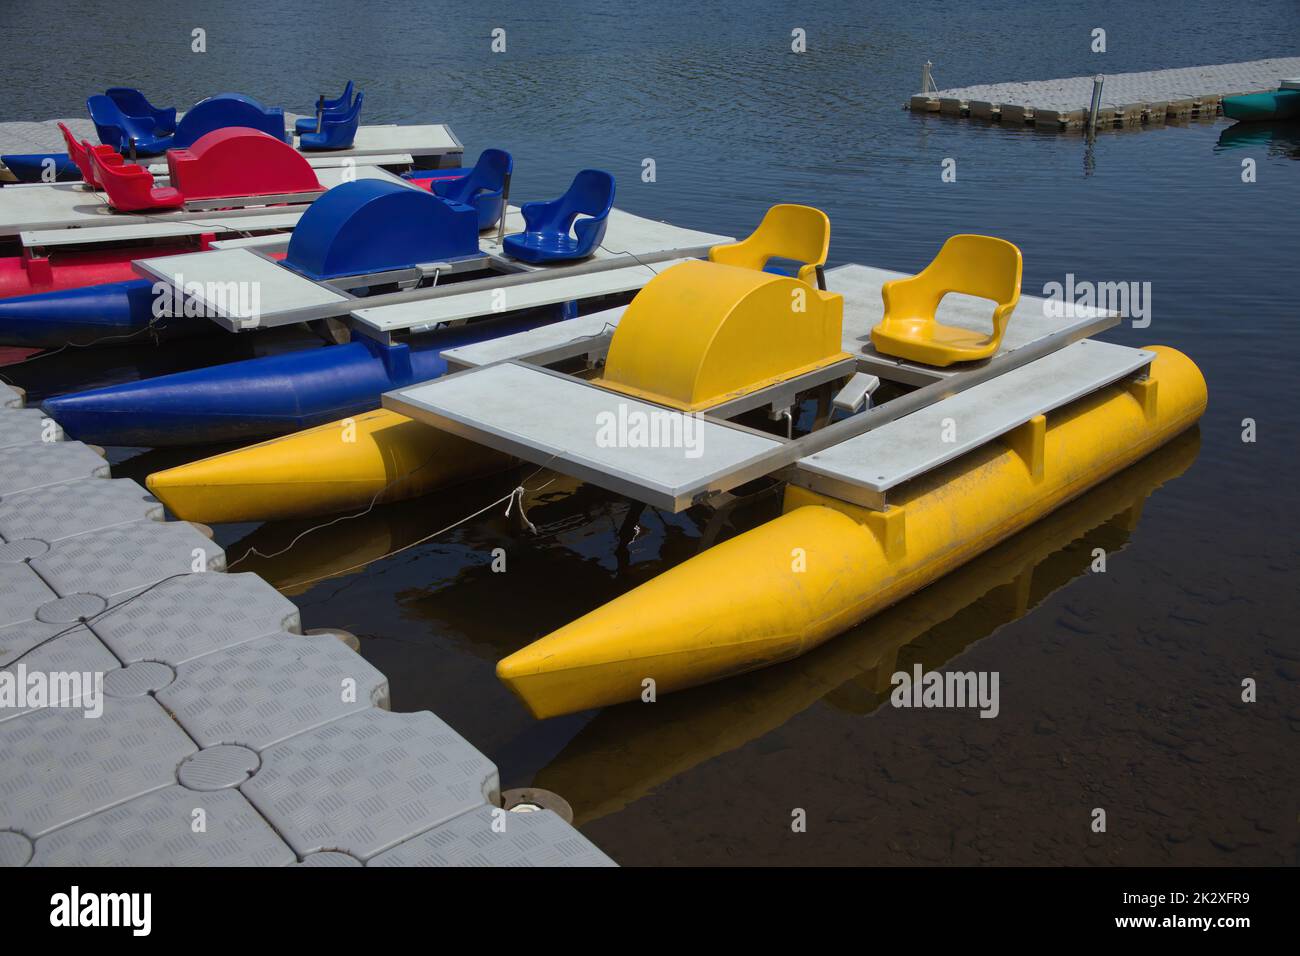 pedalo boats accosted on quay in water summer sport recreation Stock Photo